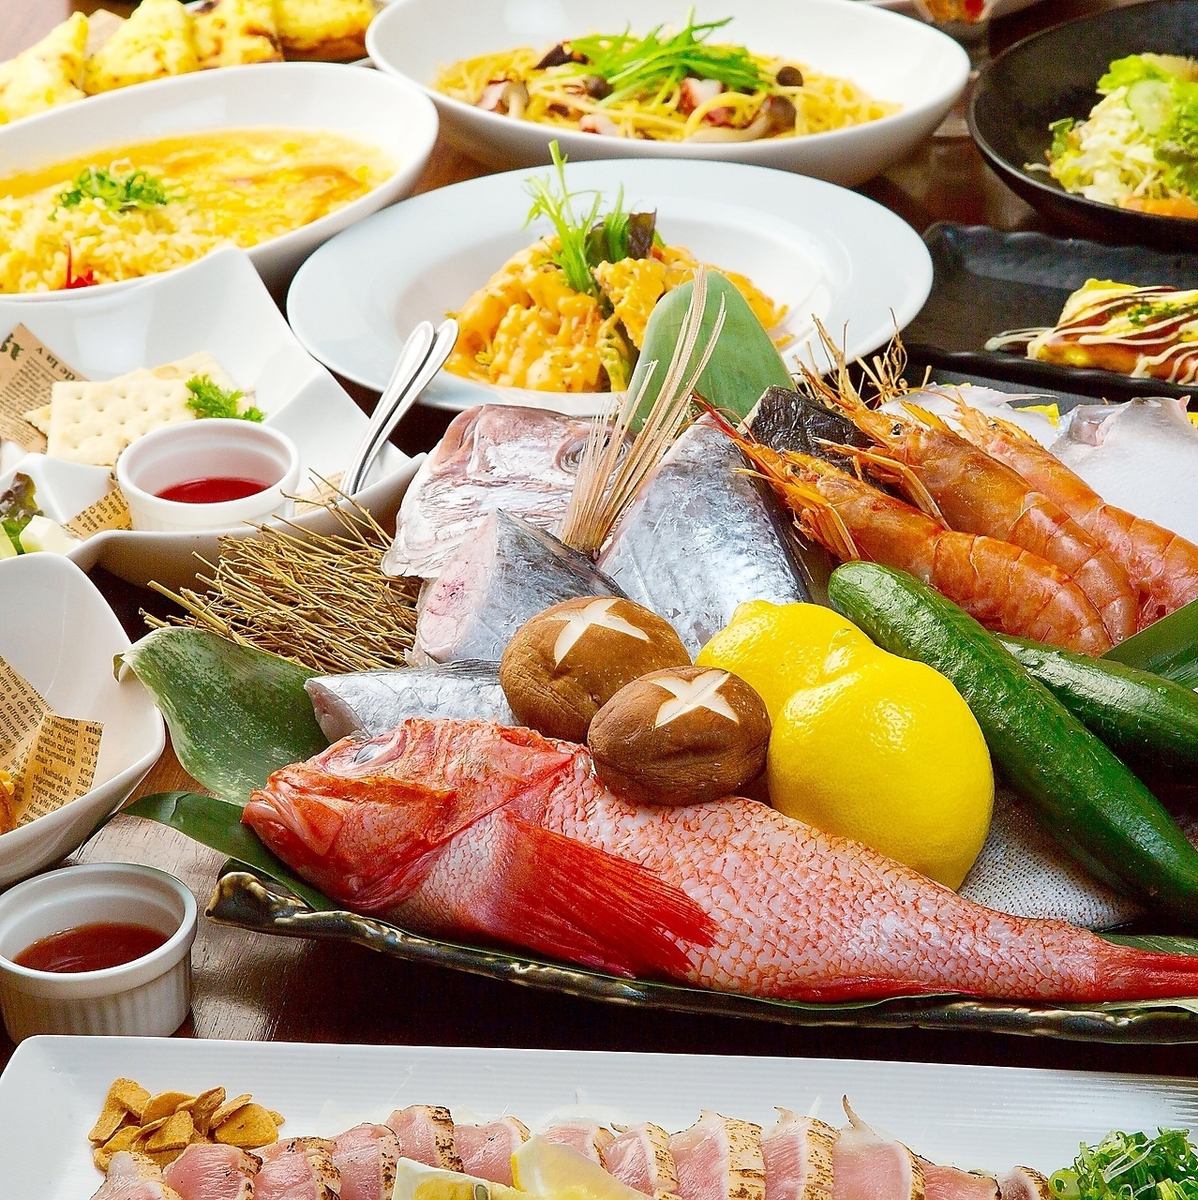 Banquet courses available for 3,000 yen and 4,000 yen! Great value for money with all-you-can-drink included!